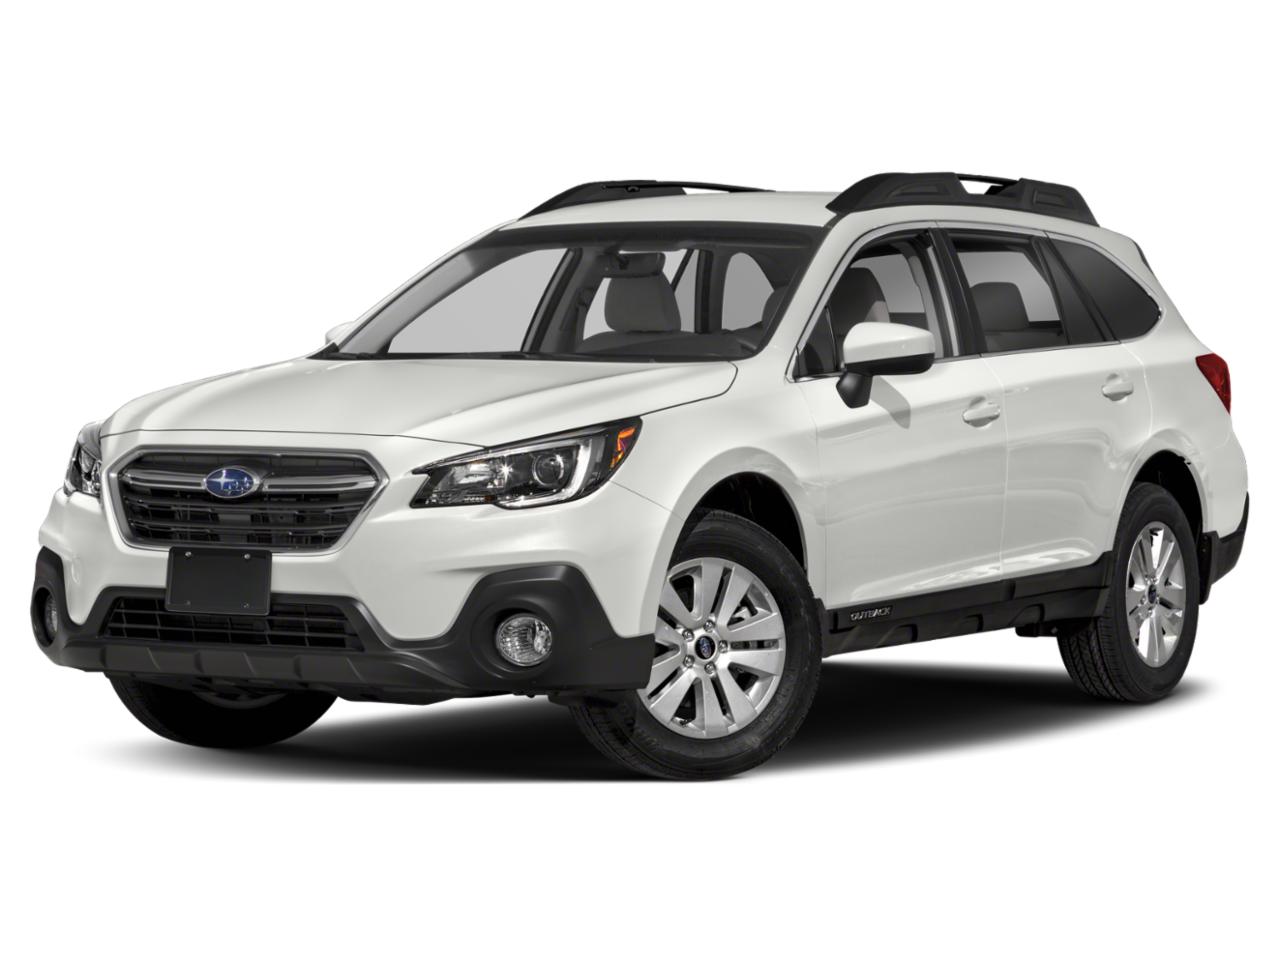 Used 2019 Subaru Outback Premium with VIN 4S4BSAFC5K3249904 for sale in Glenwood, Minnesota